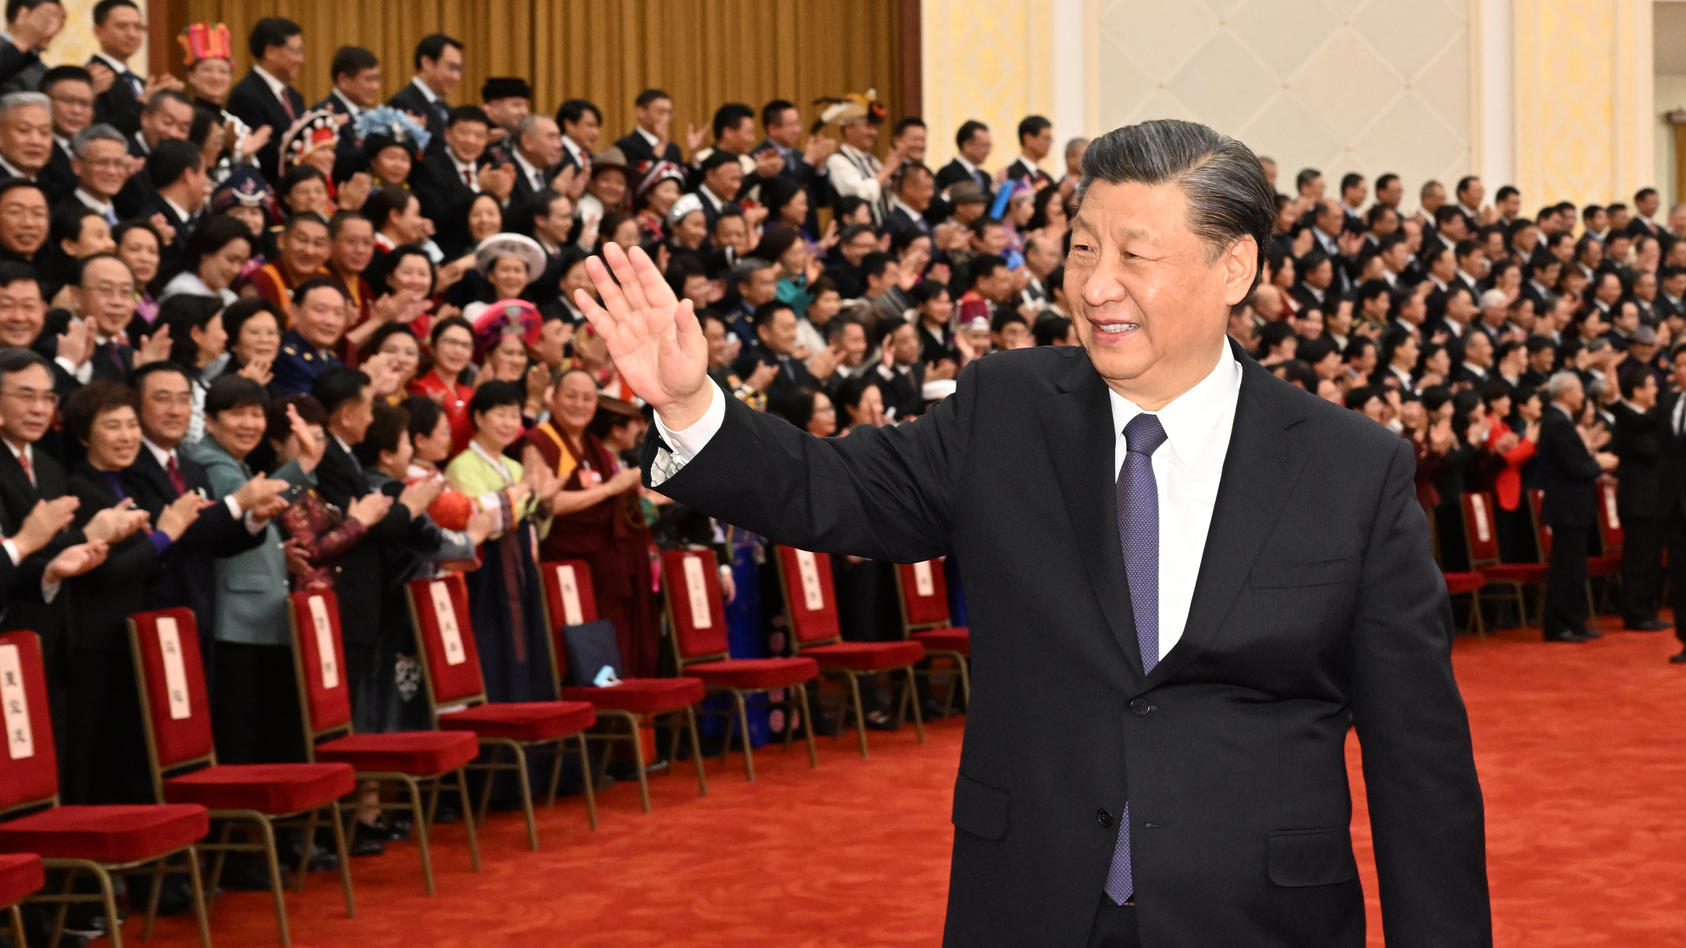 (230311) -- BEIJING, March 11, 2023 (action press/Xinhua) -- Xi Jinping waves to members of the 14th National Committee of the Chinese People's Political Consultative Conference (CPPCC) in Beijing, capital of China, March 11, 2023. Xi Jinping and oth